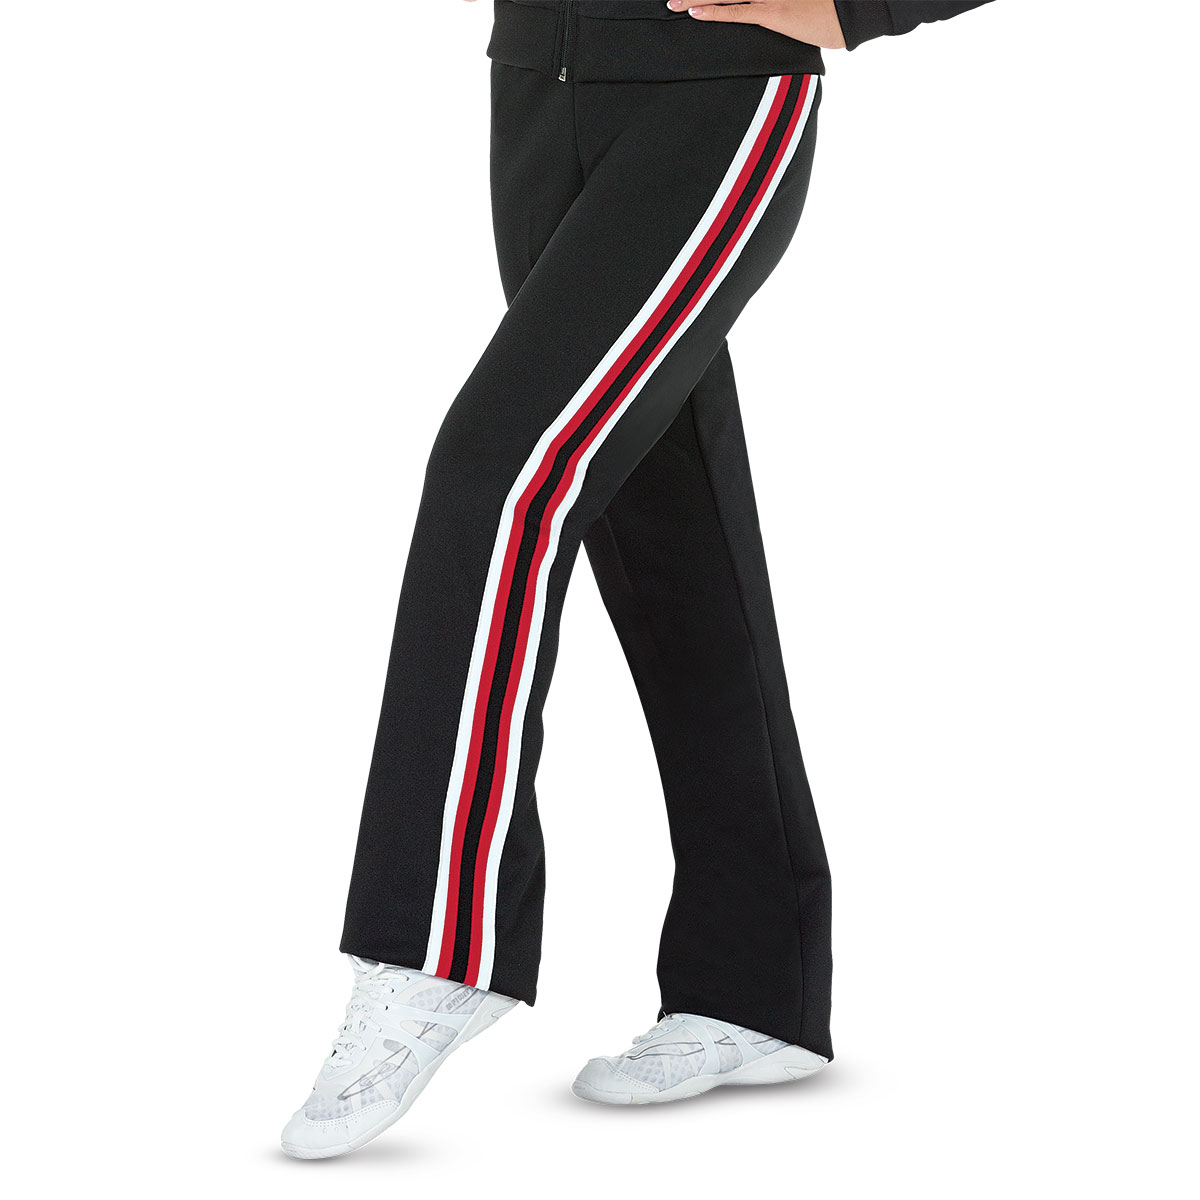 Poly Boot Cut Warm-Up Pants with Side Stripes